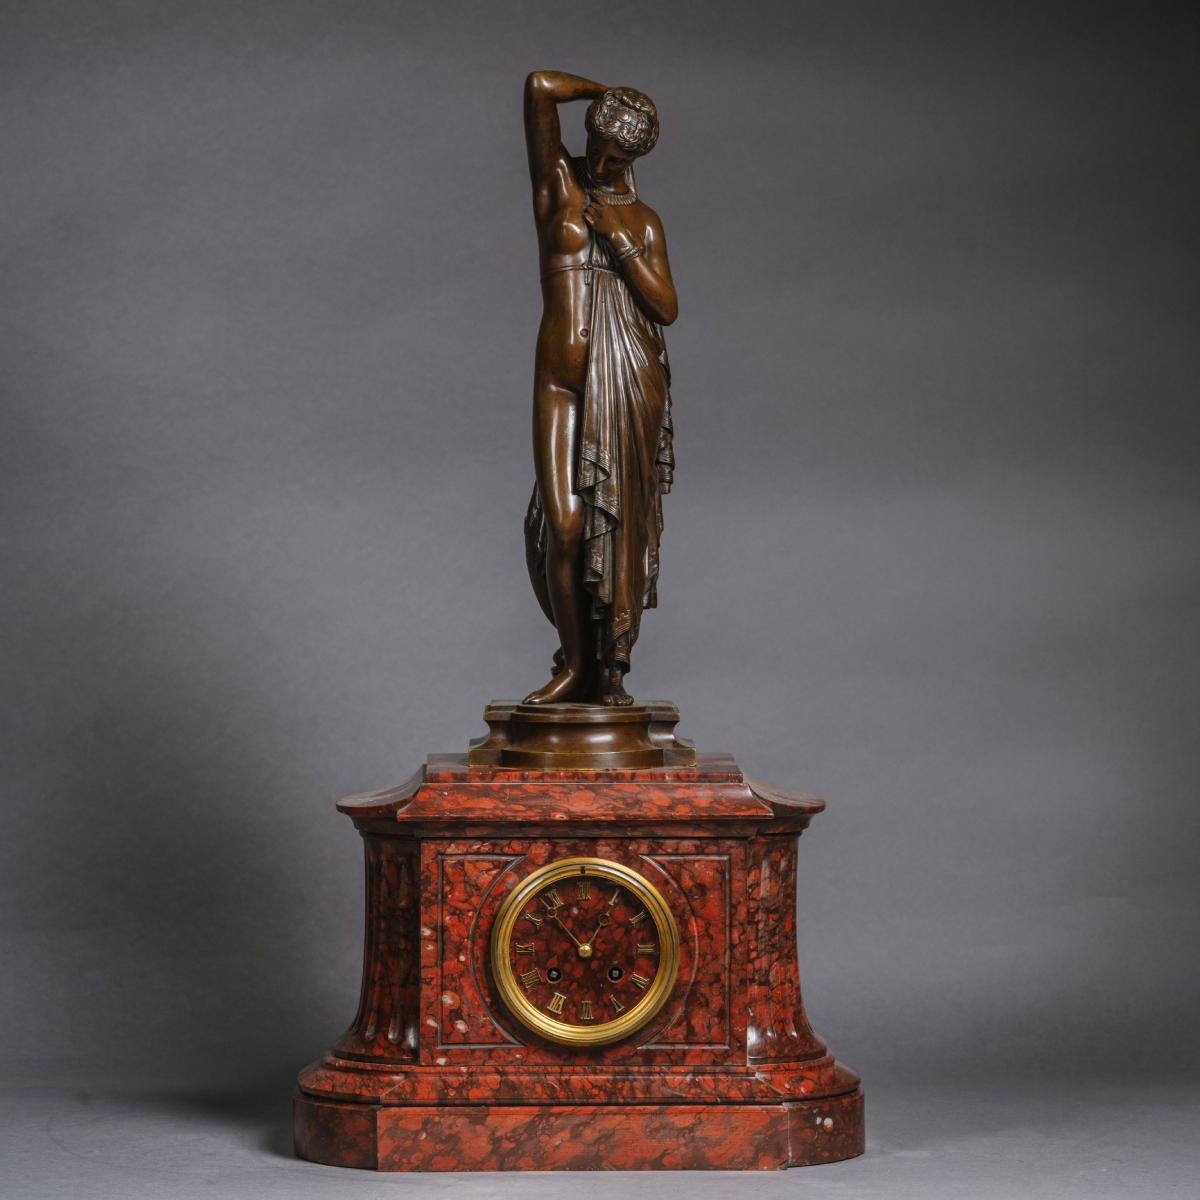 A Napoléon III Marble Mantle Clock With A Patinated Bronze Figure of 'Phryné' by James Pradier